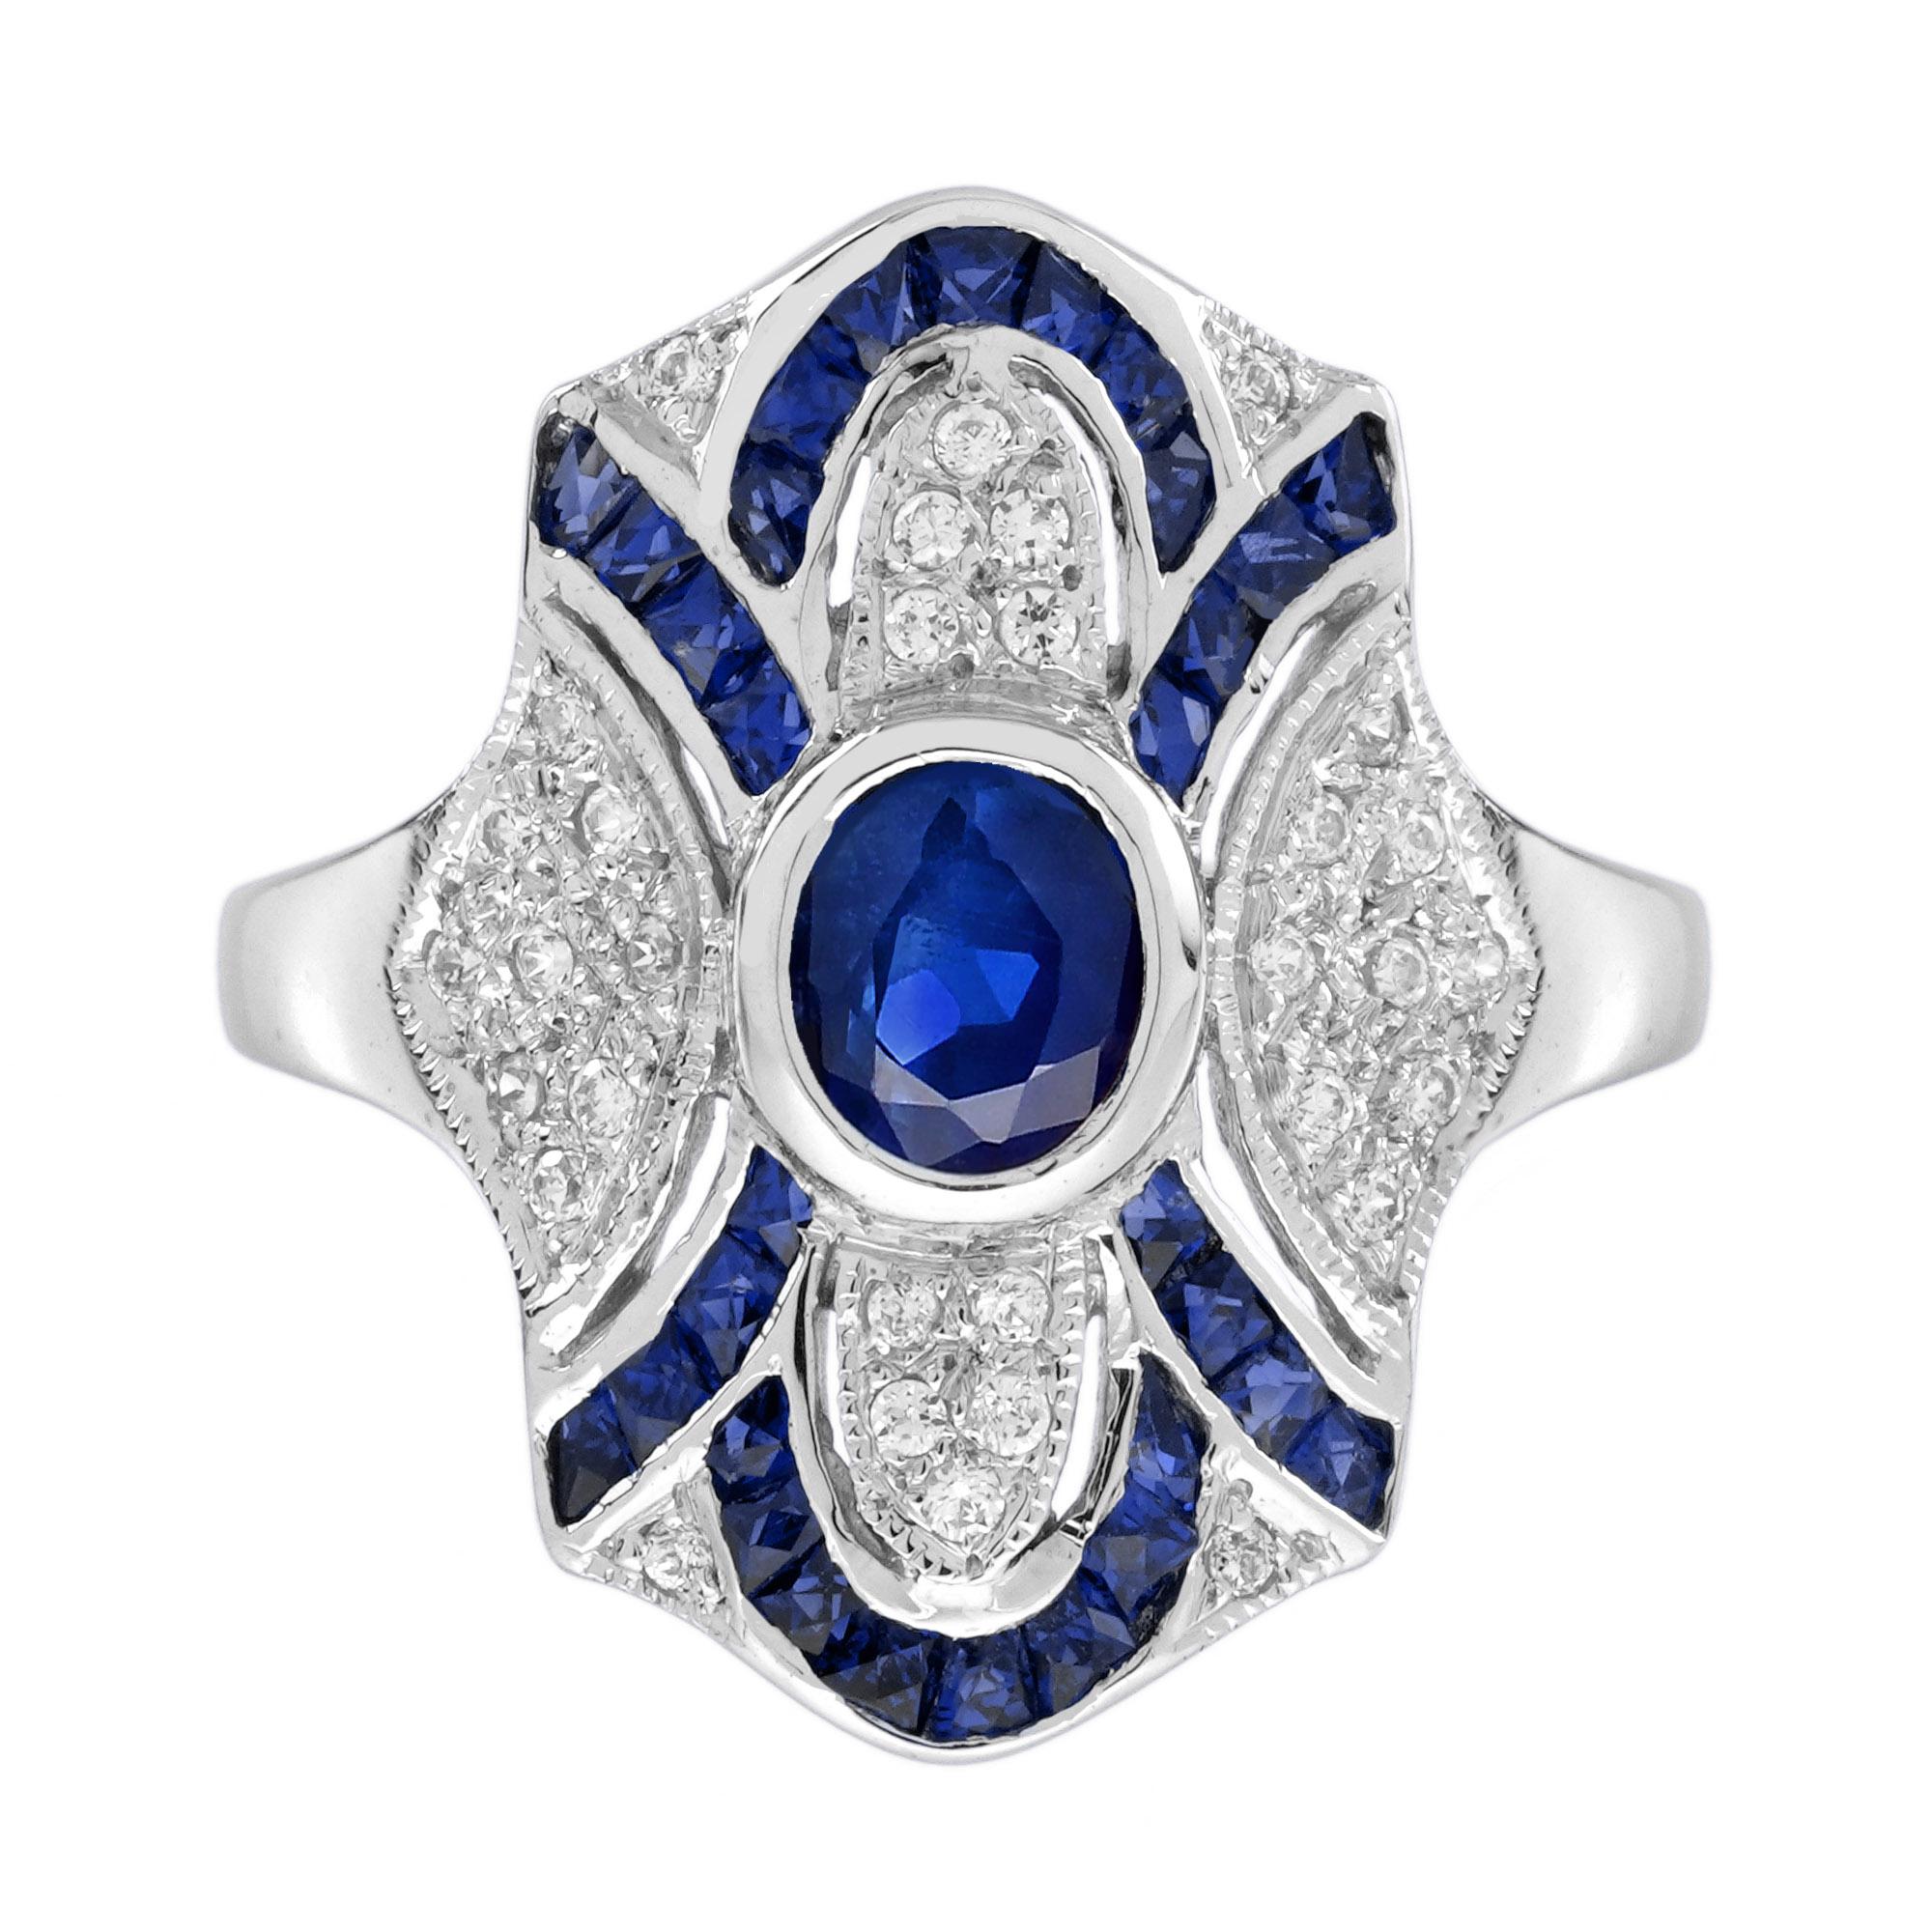 Blue Sapphire and diamond Art Deco Style Dinner Ring in 18K White Gold